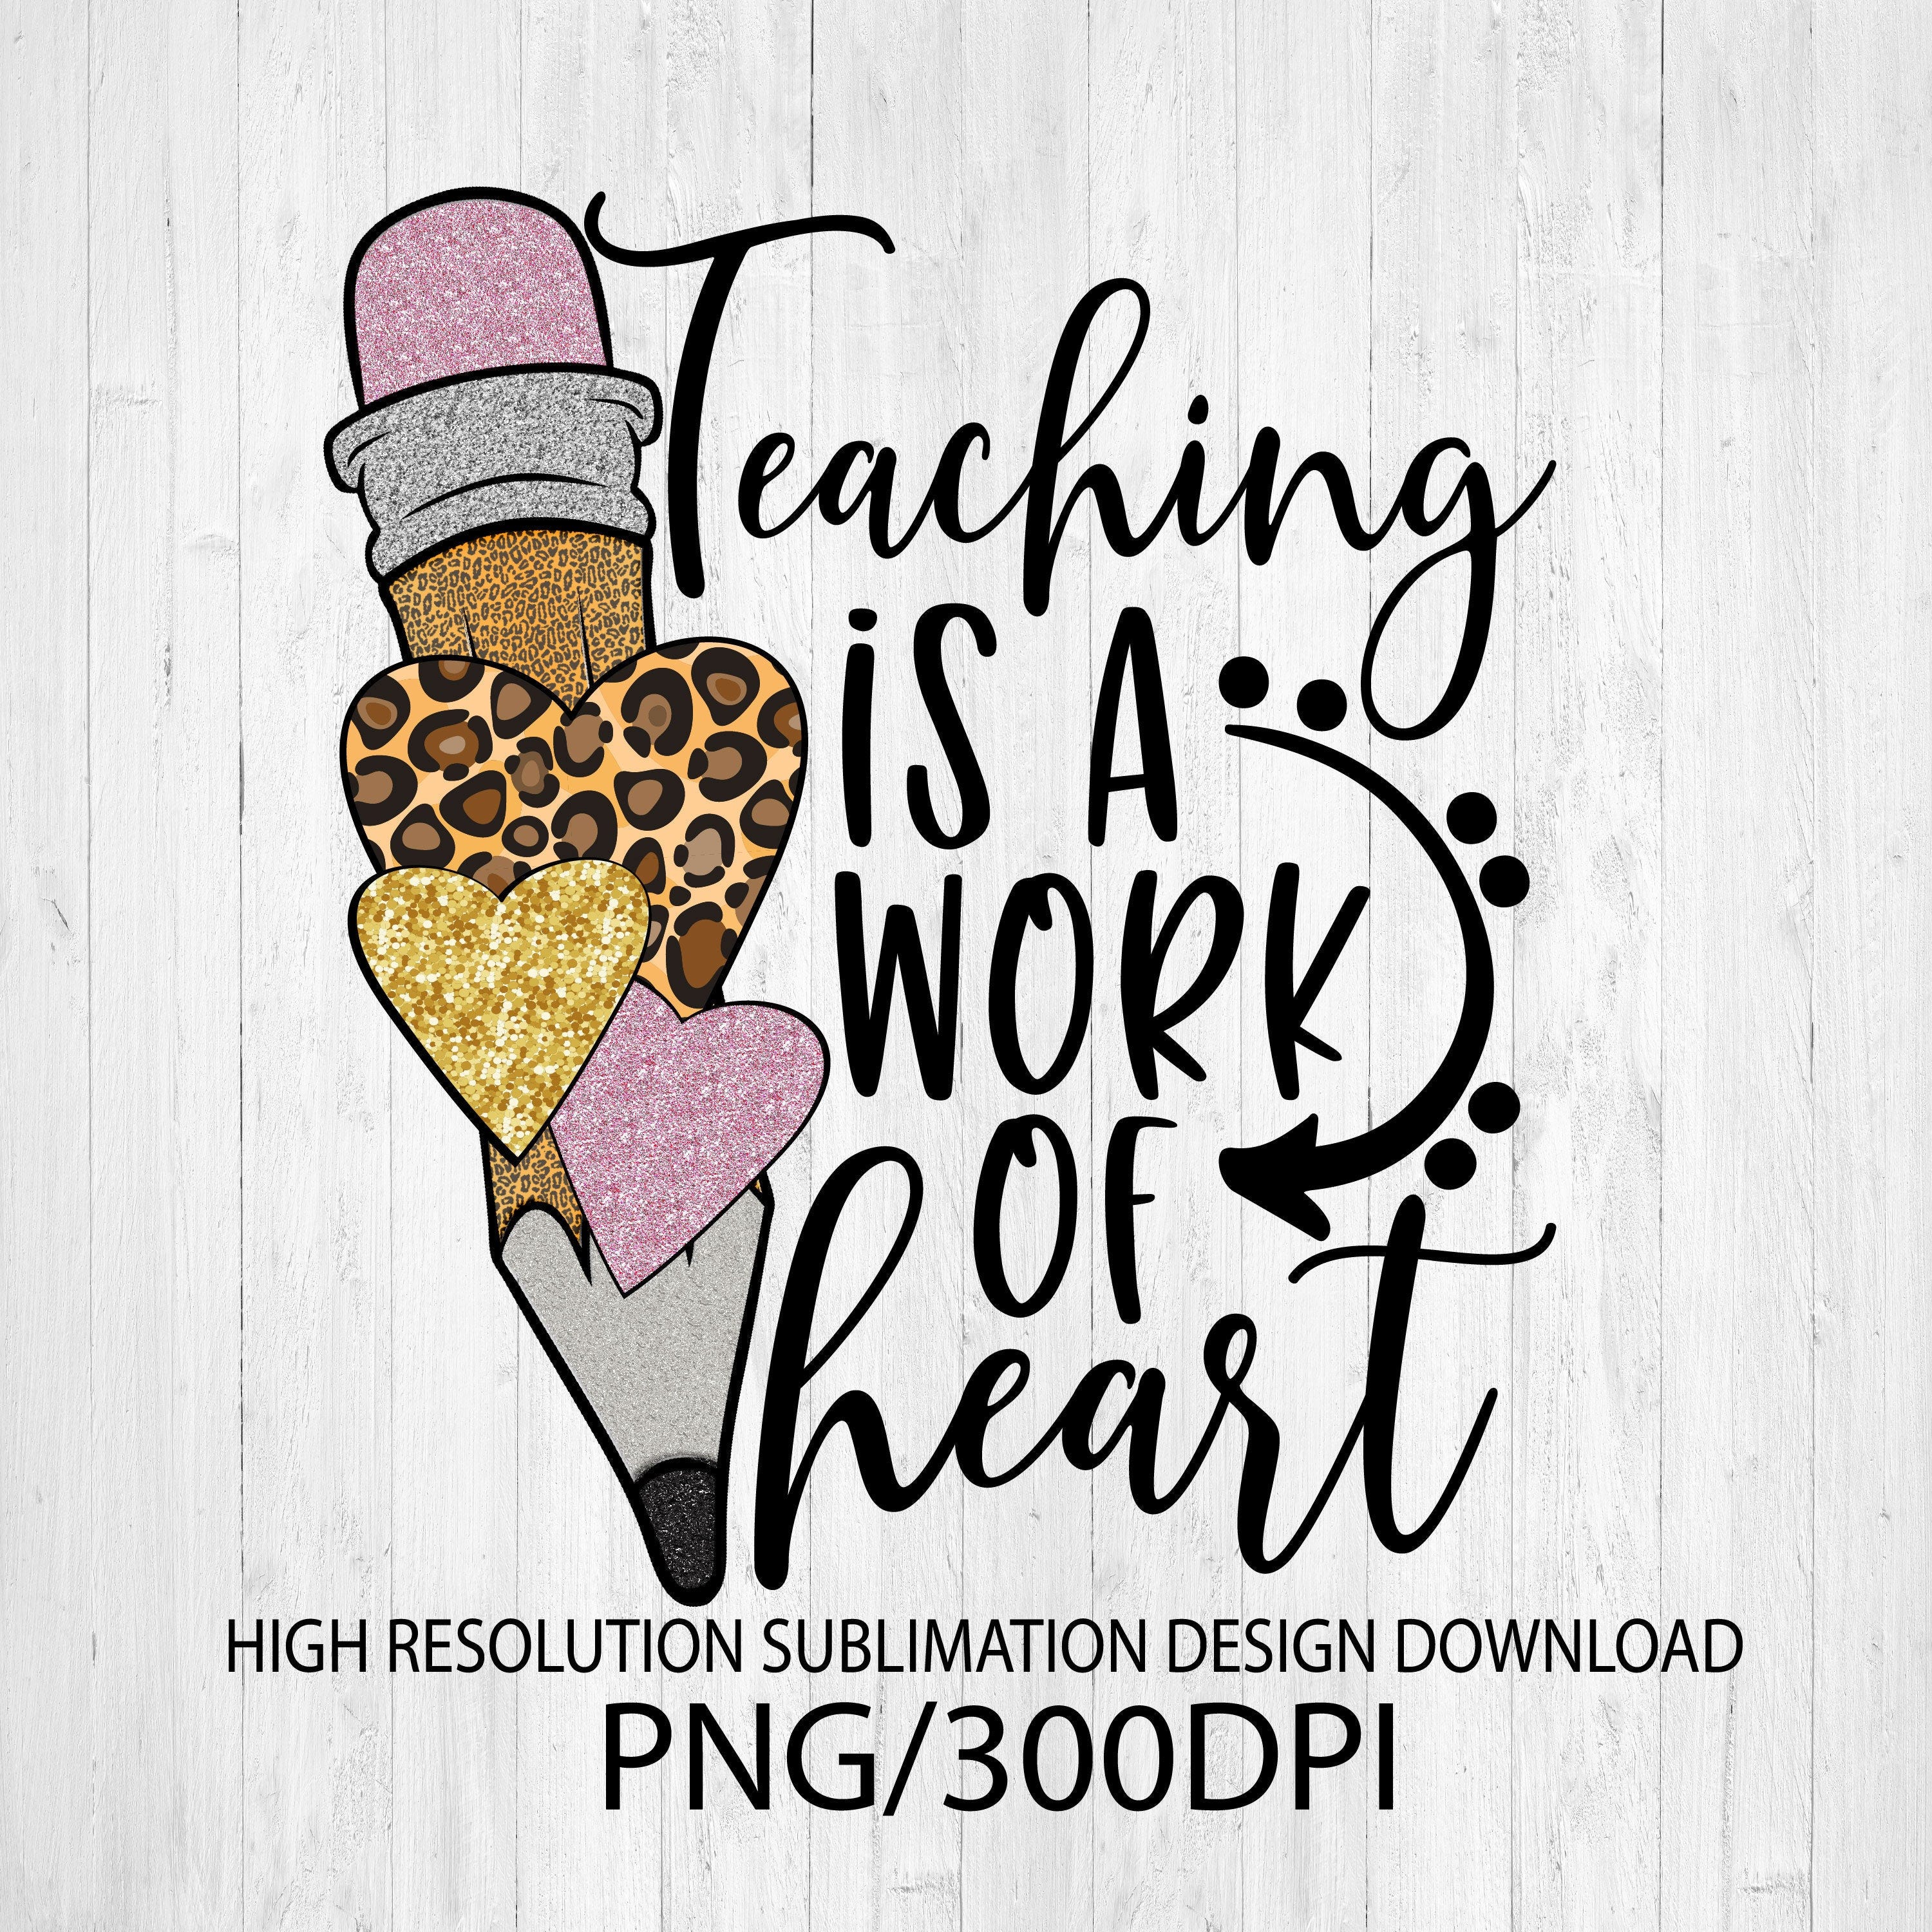 Teaching is a work of heart png - Sublimation design - Sublimation design download - DTG printing - School t-shirts - Teacher PNG